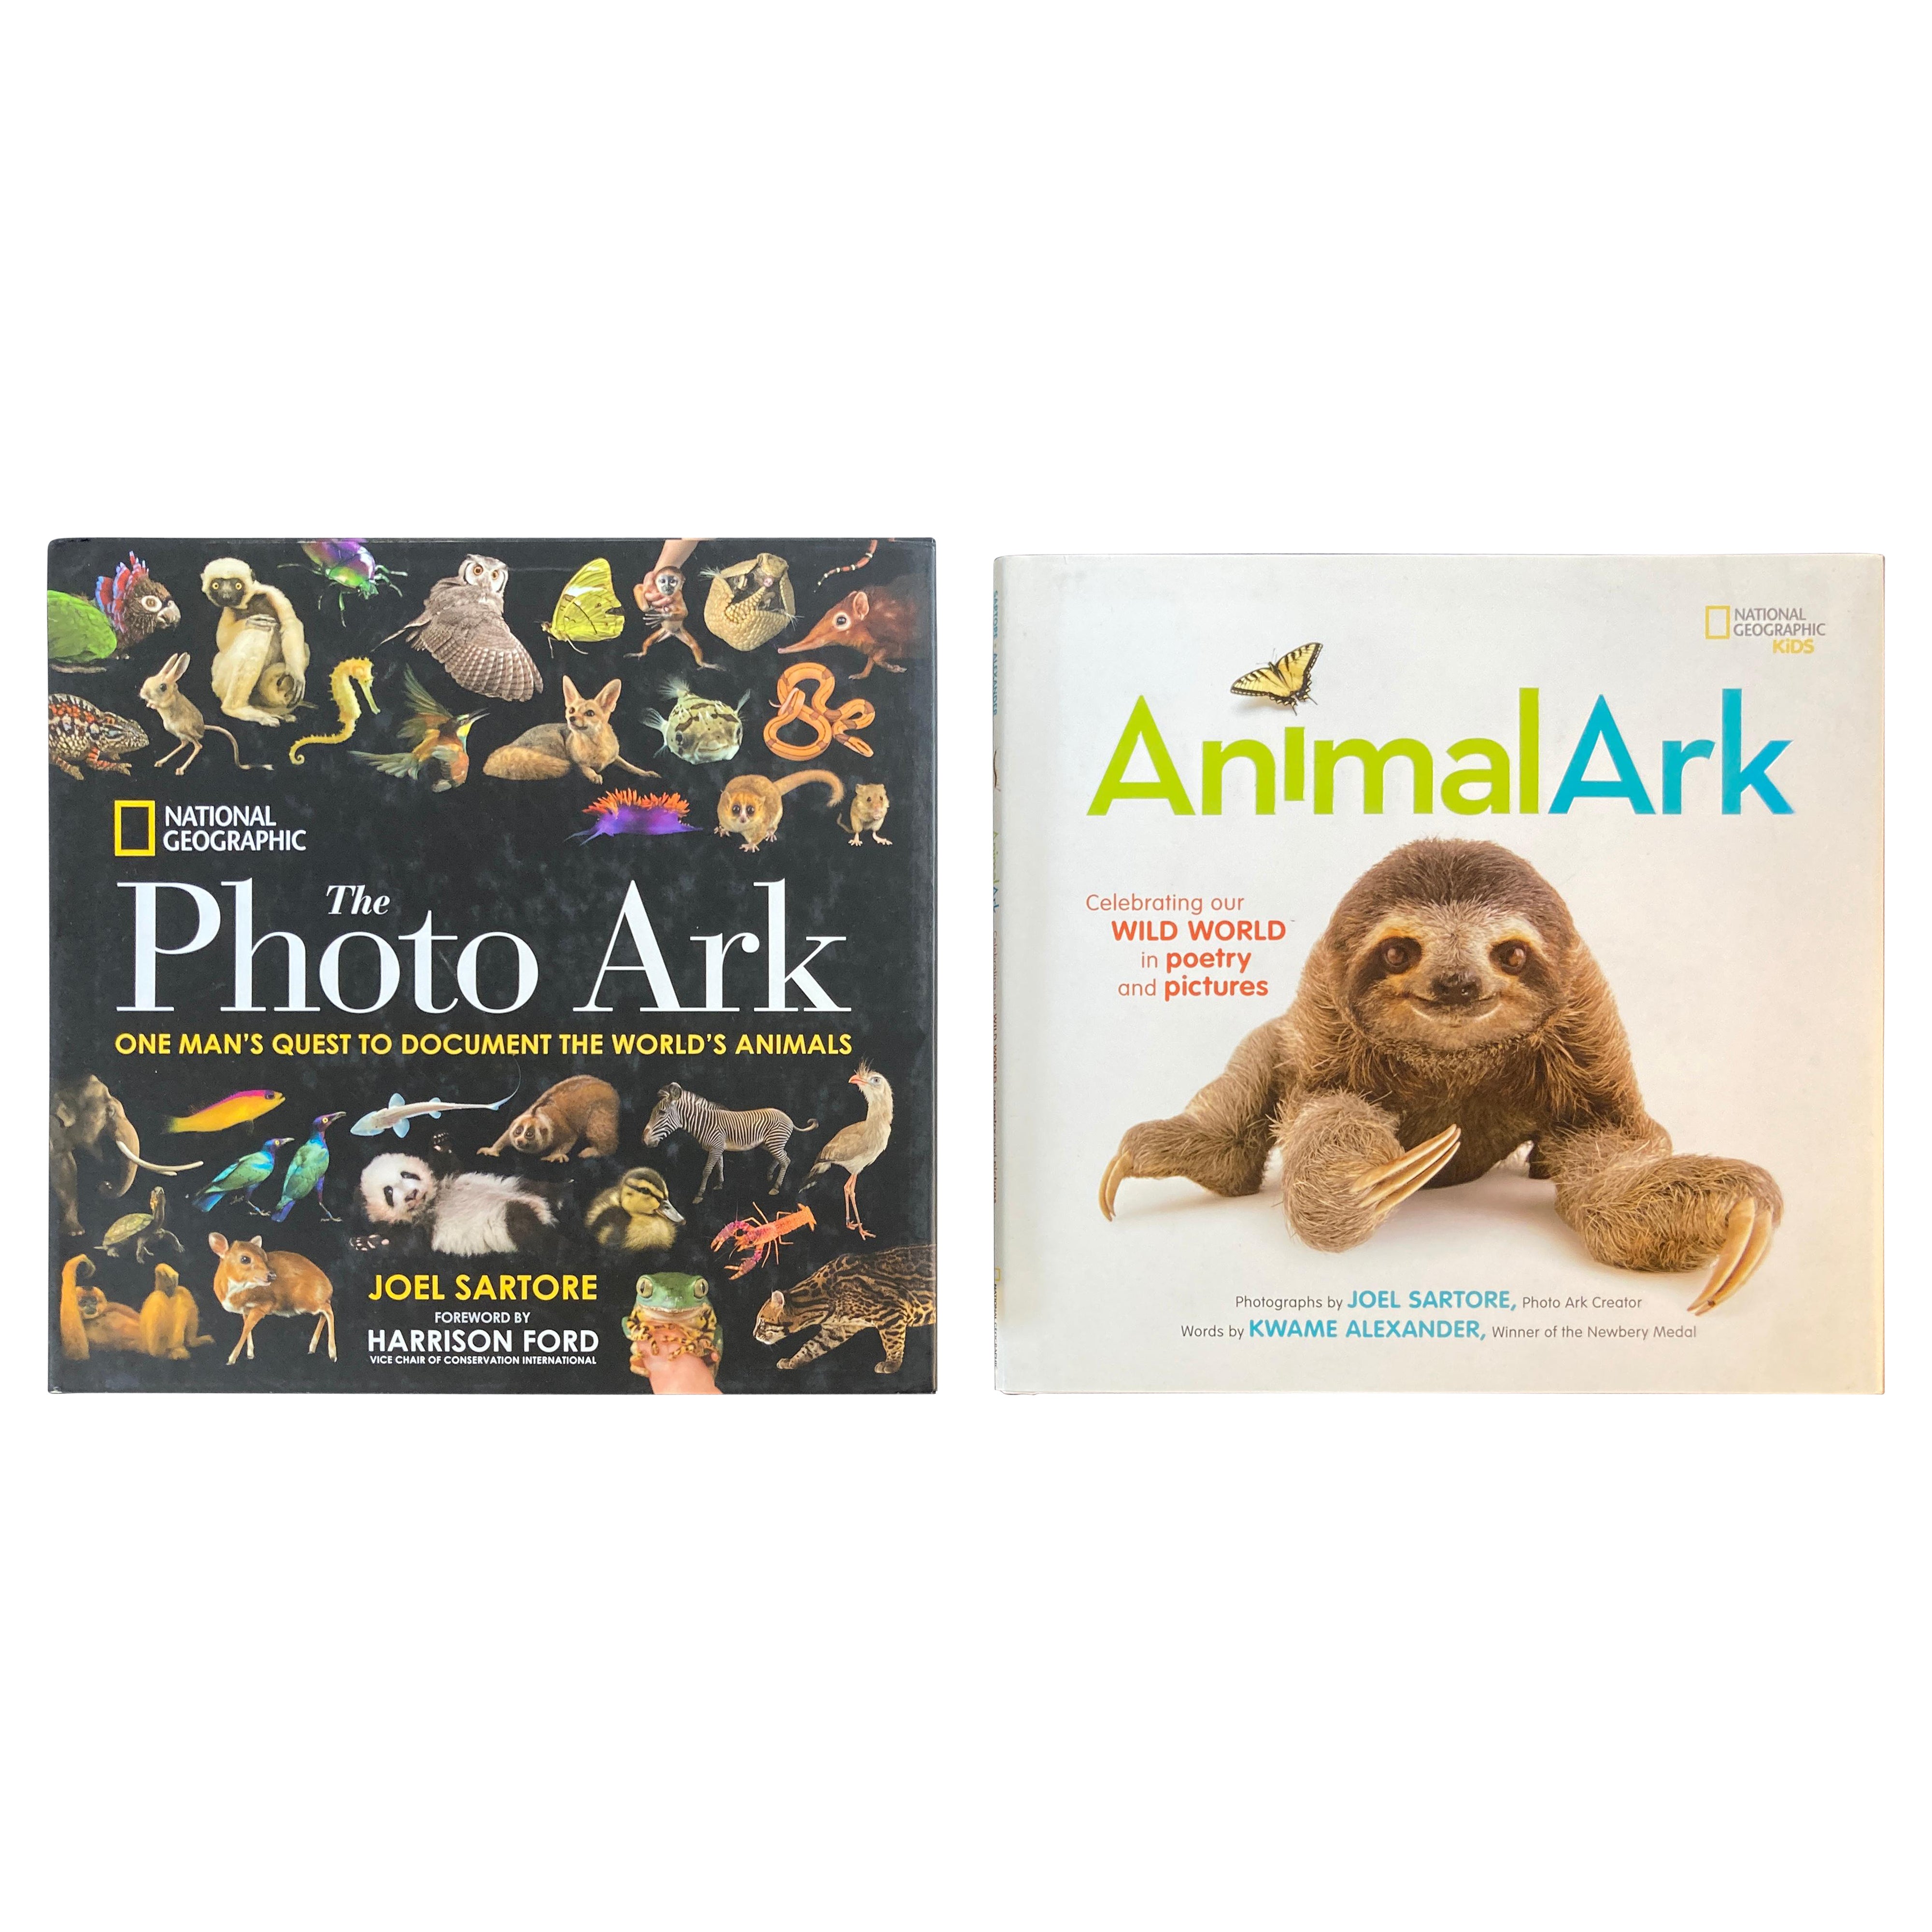 National Geographic The Photo Ark The Quest to Document the World's Animals